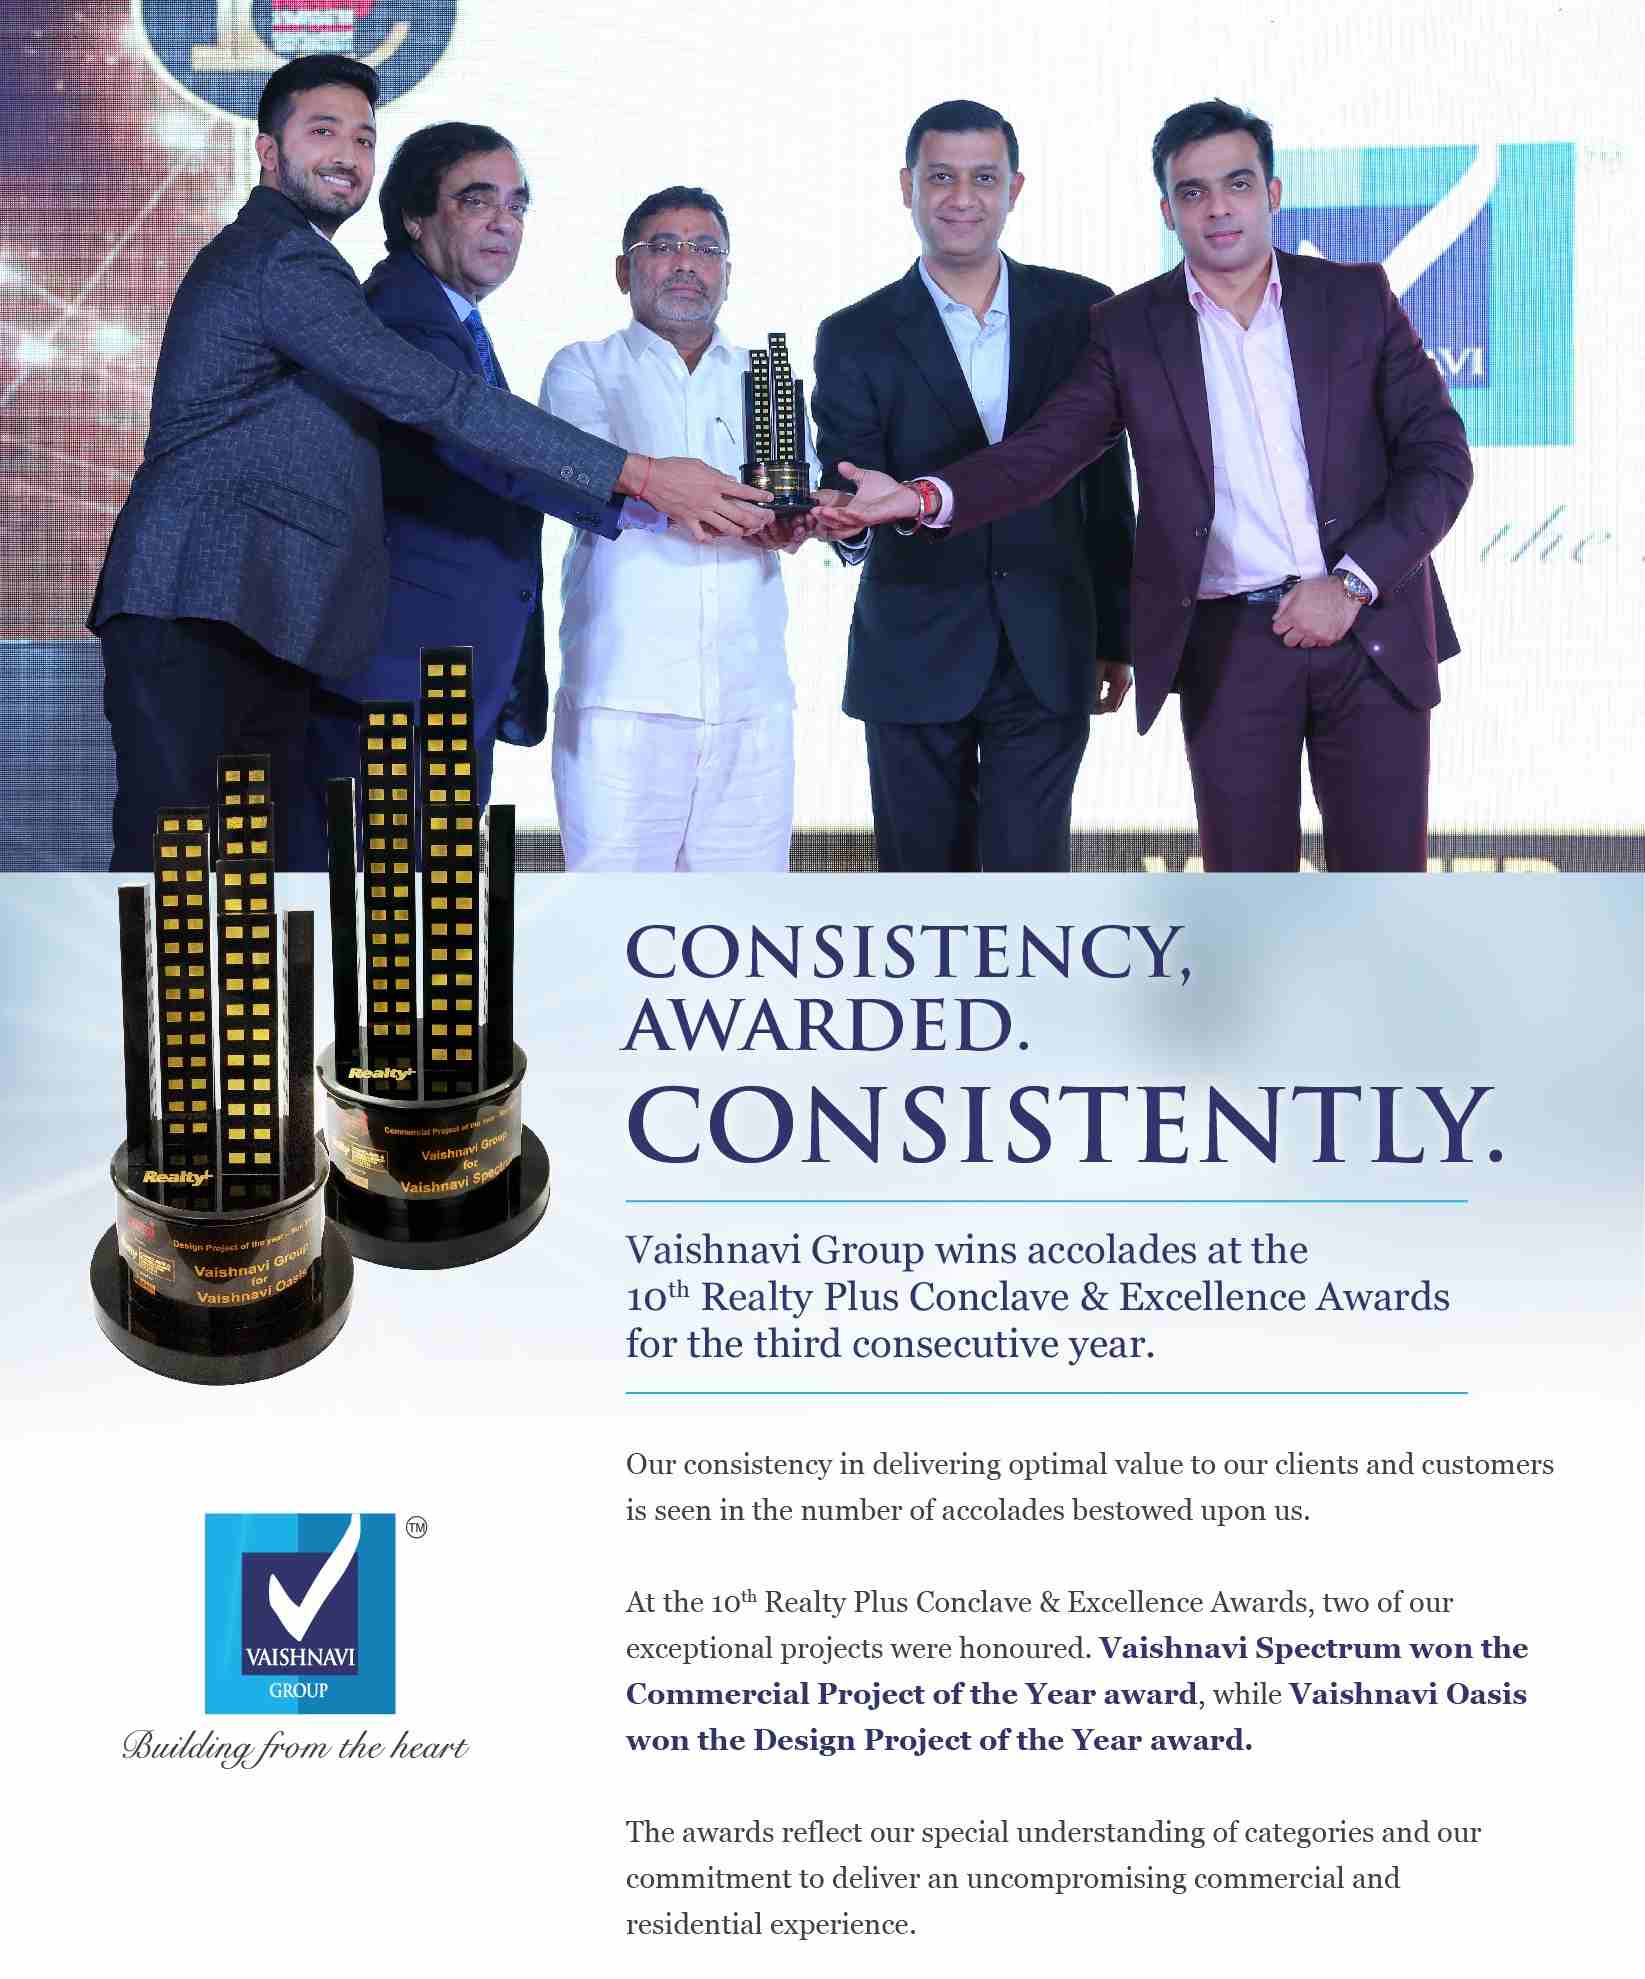 Vaishnavi Group wins accolades at the 10th Realty Plus Conclave & Excellence Awards 2018 Update